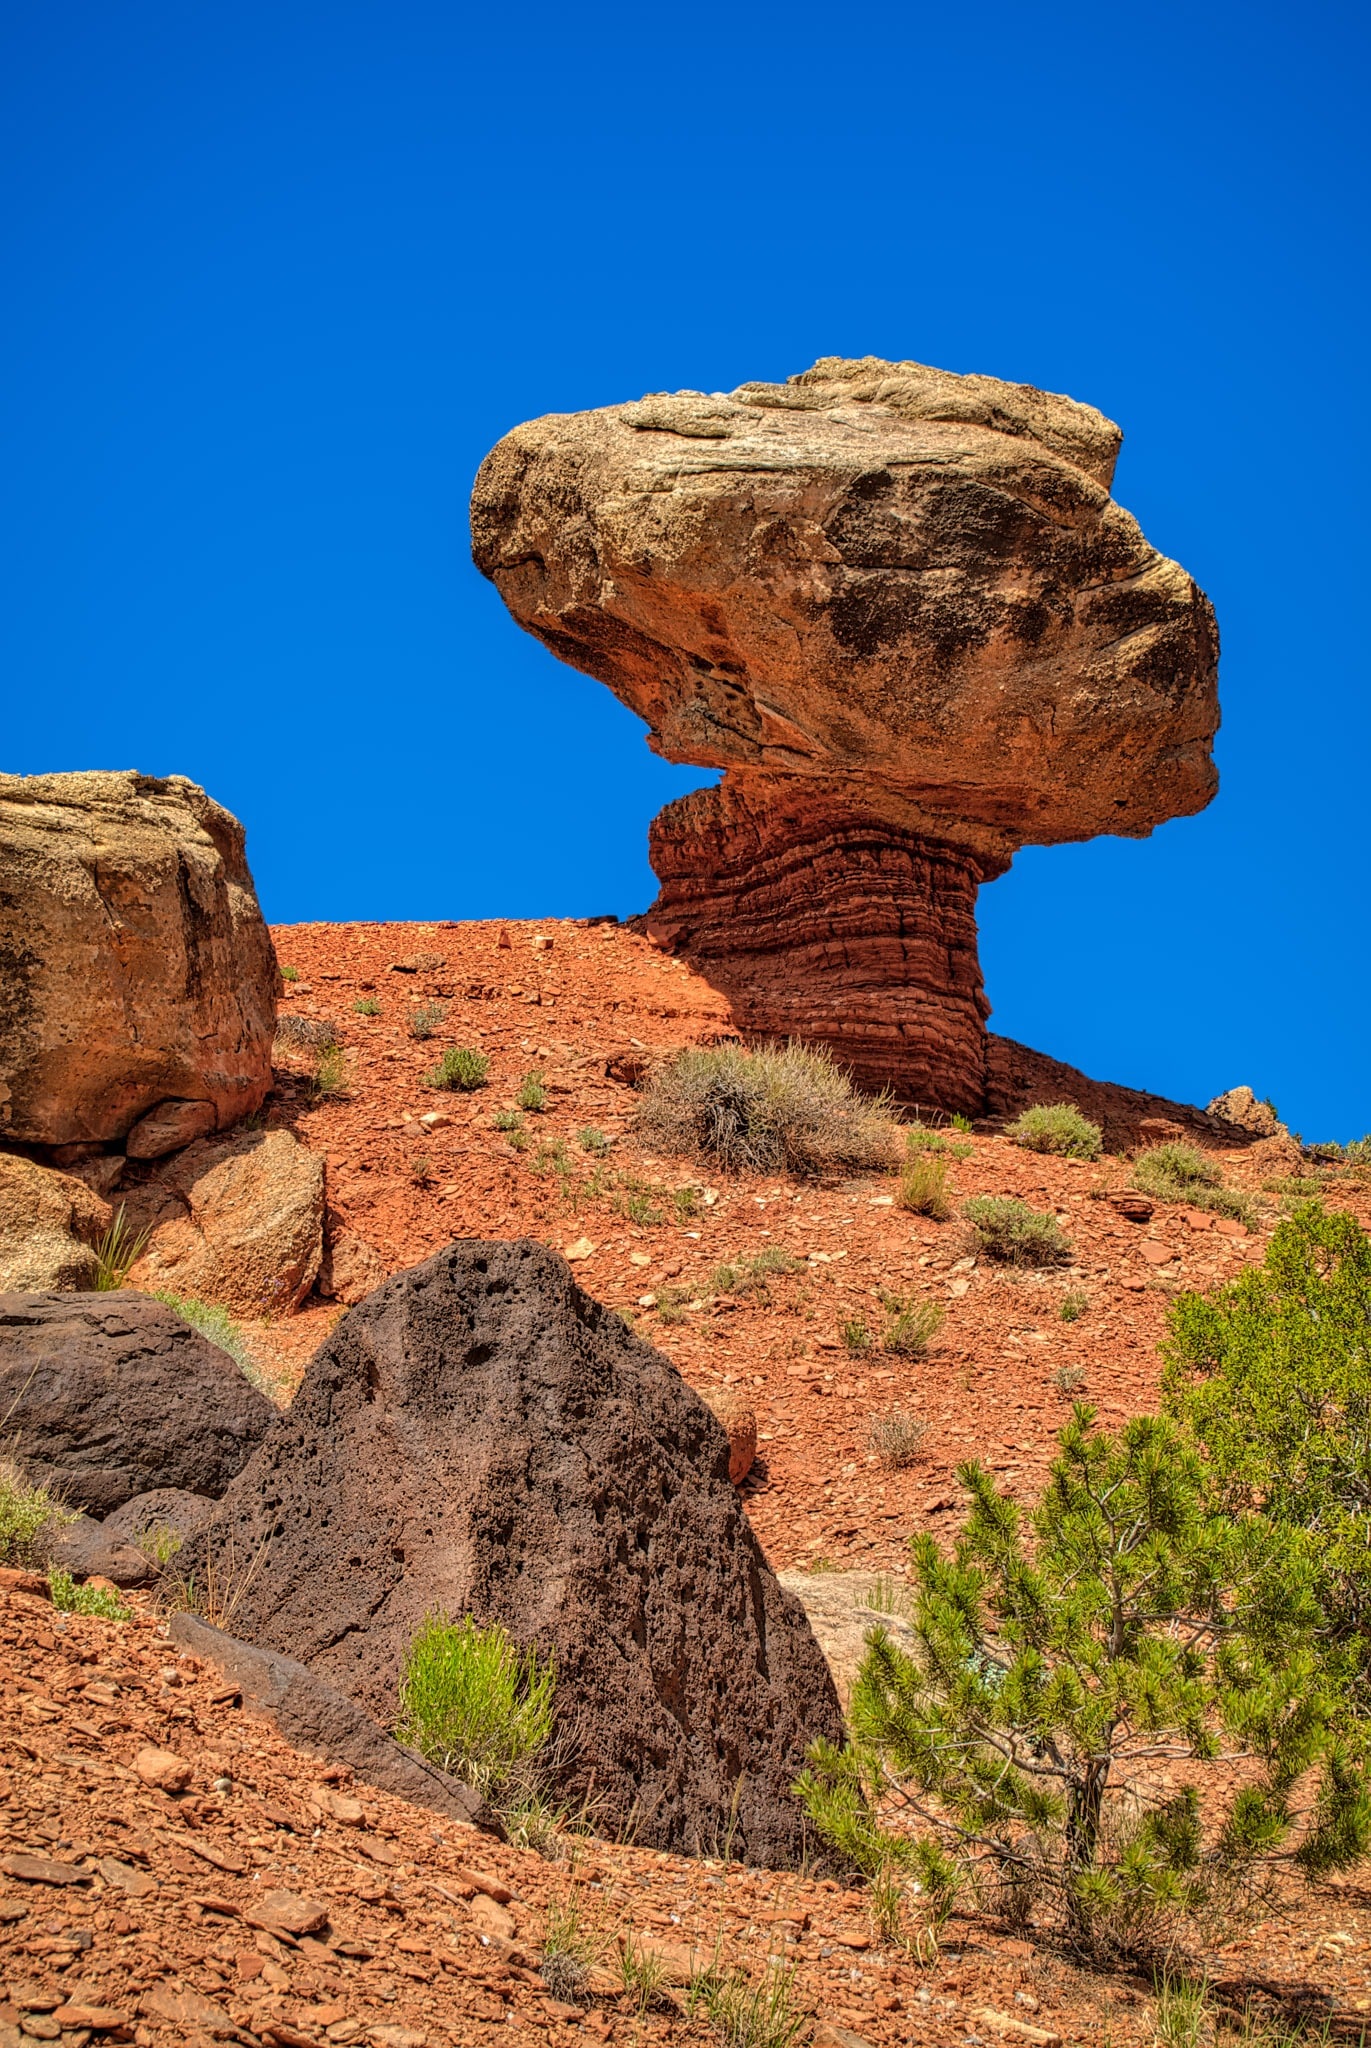 This mushroom rock formation has a Shinarump 'shroom balanced upon a Chinle Formation stem. This formation is on Hartnet Road near Cathedral Valley Overlook in Capitol Reef National Park, Utah.